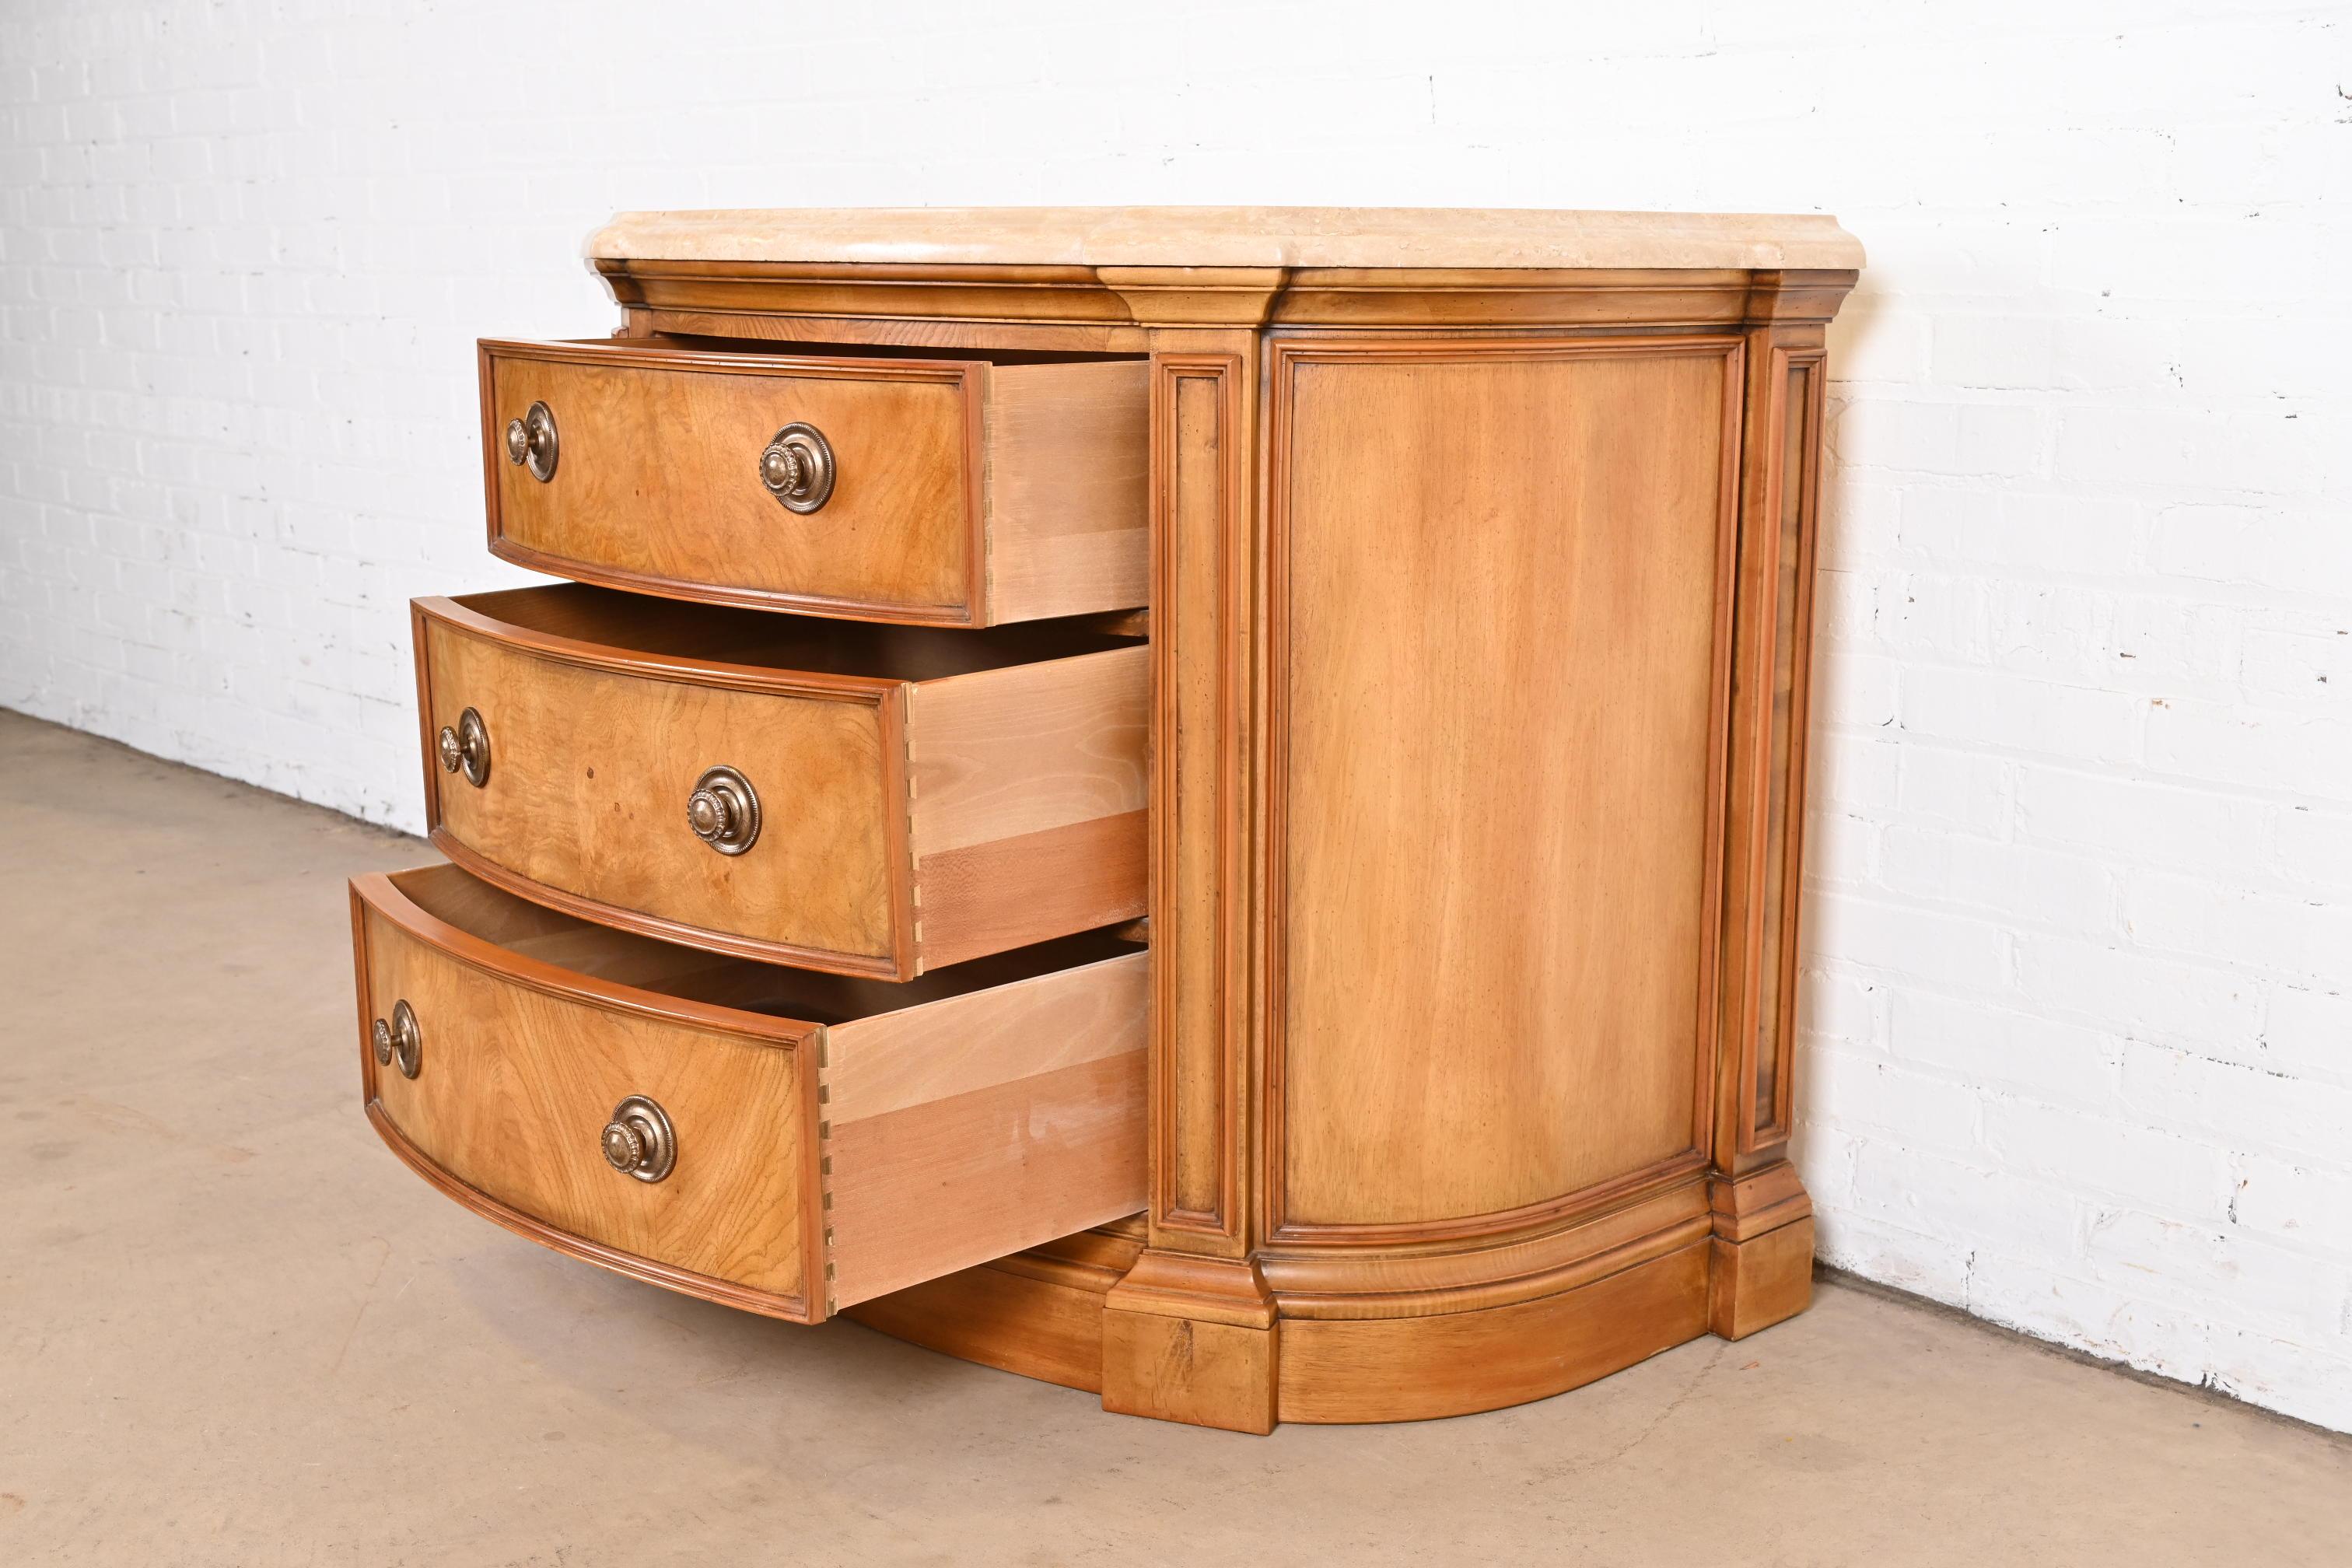 Brass Henredon Burl Wood Regency Marble Top Demilune Commode or Chest of Drawers For Sale